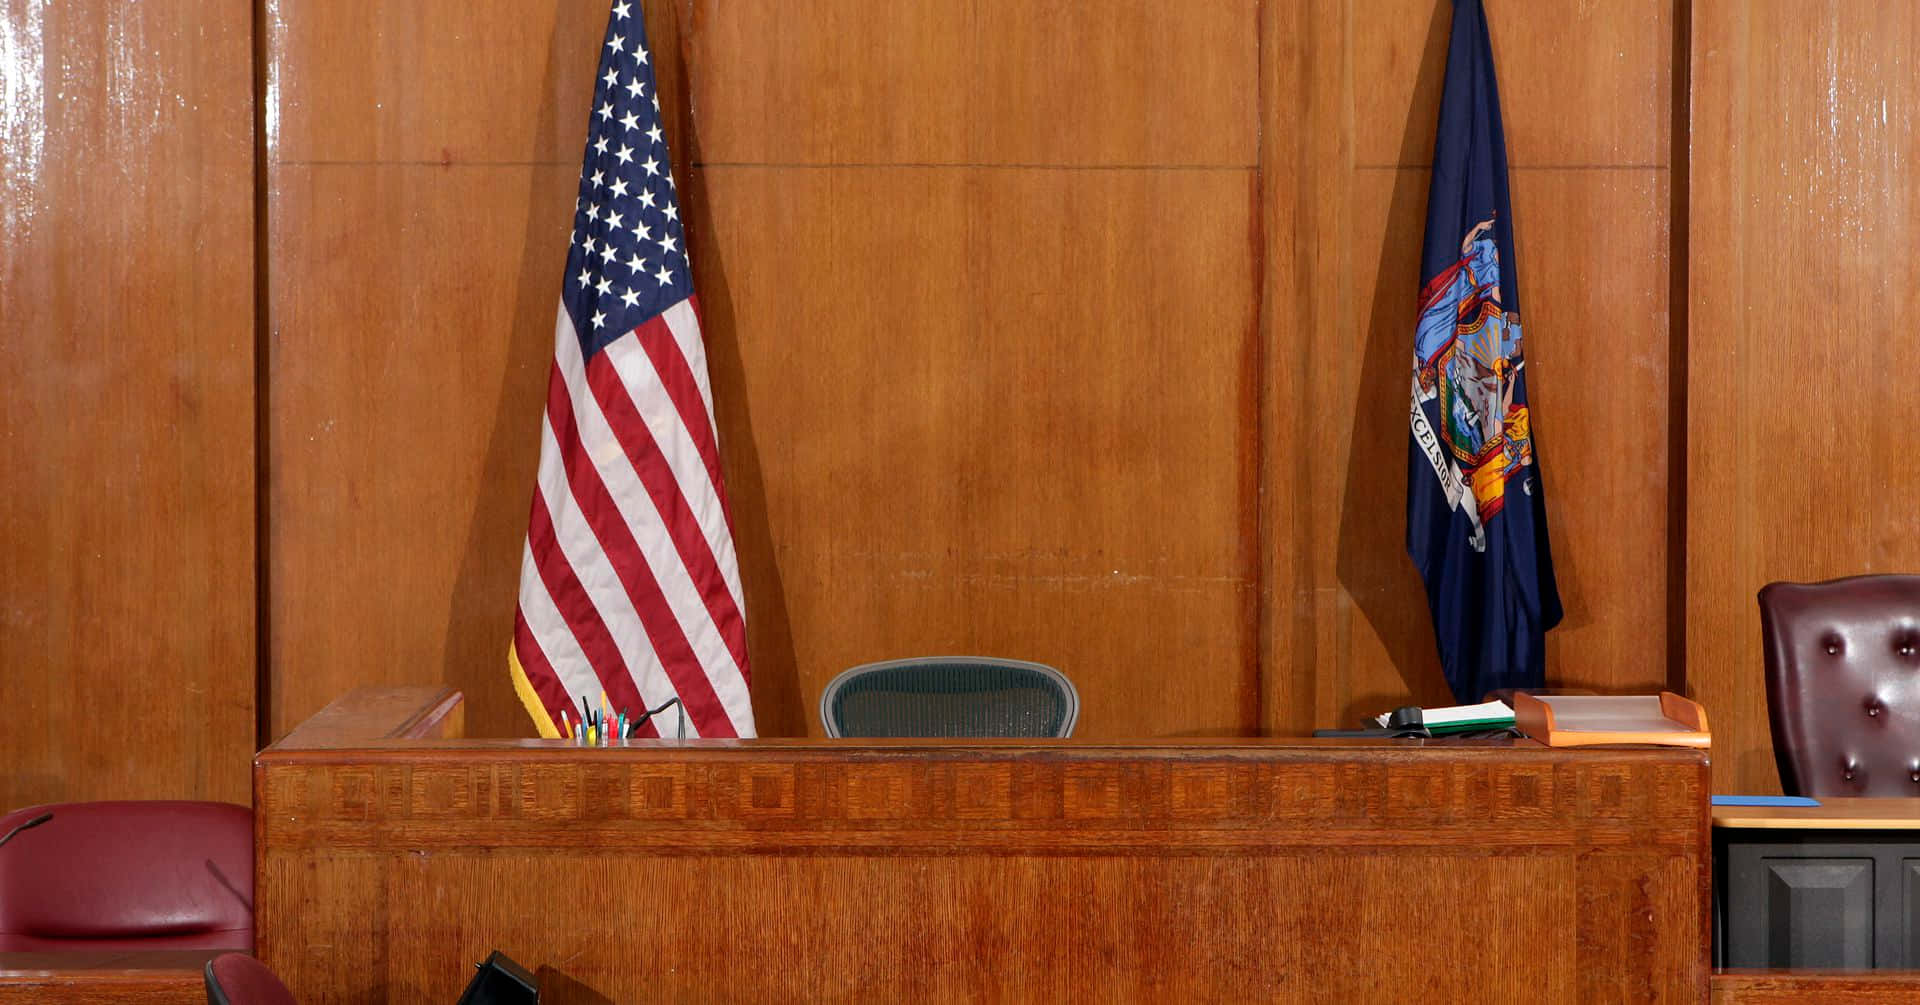 Judge Bench In Courtroom Background